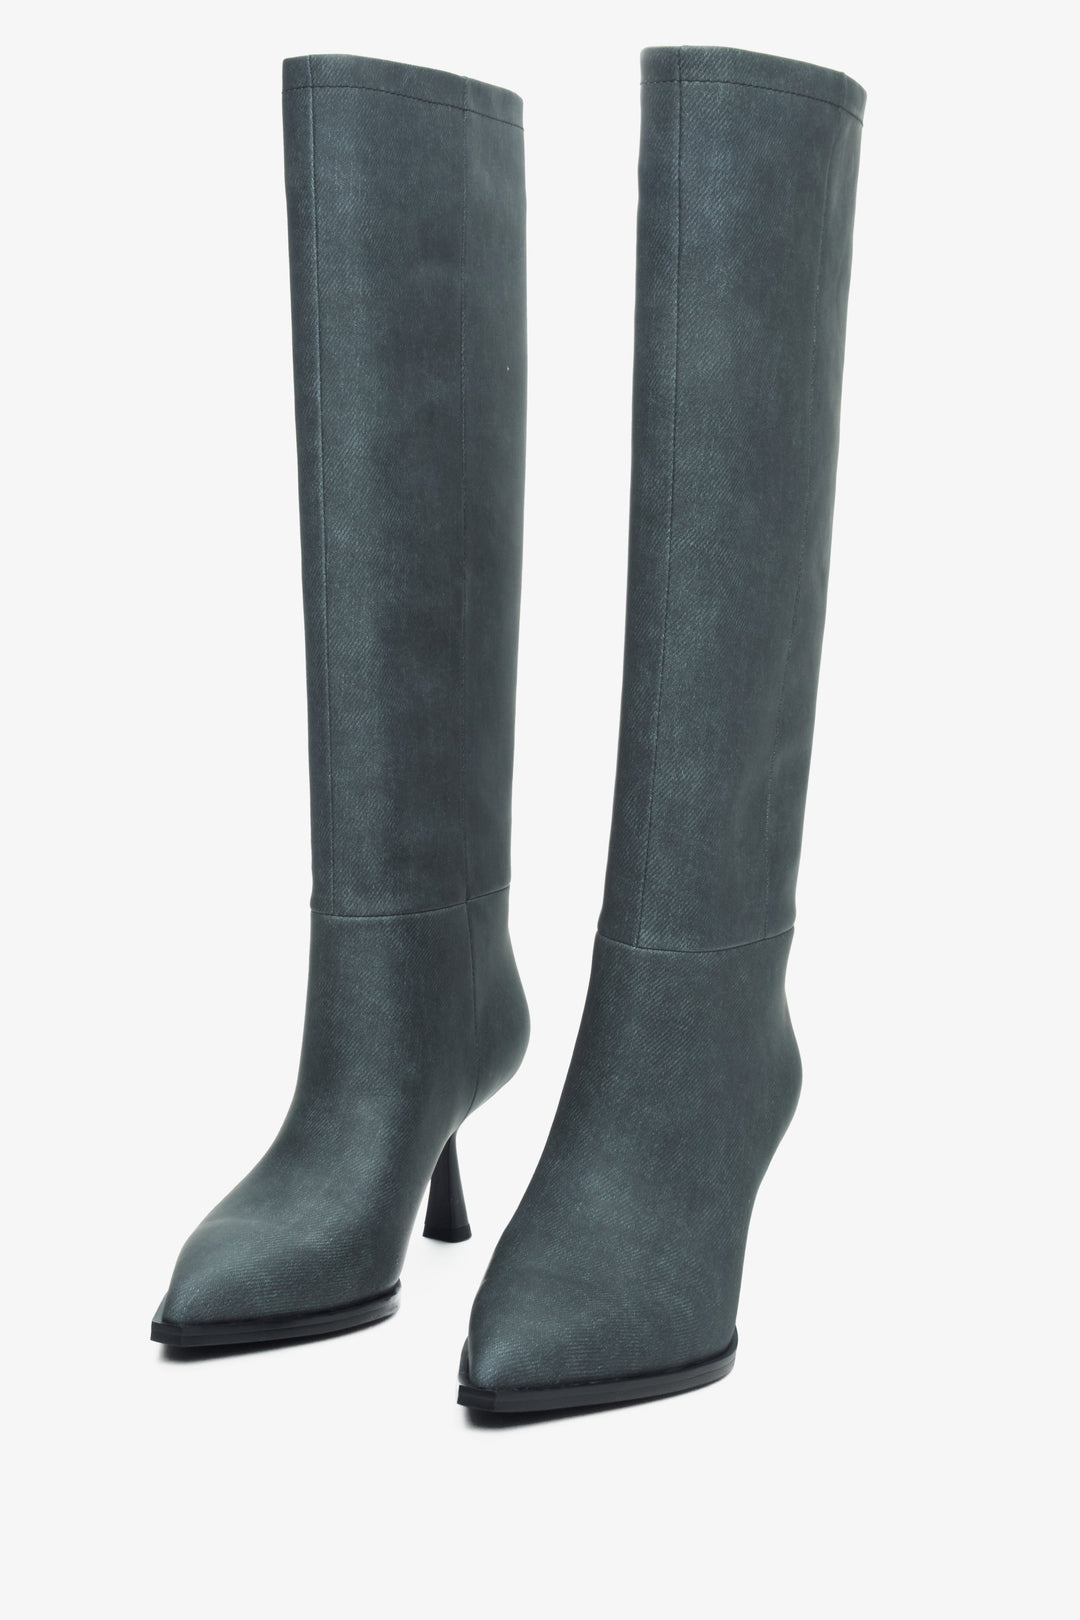 Knee-high grey women's boots by Estro with a pointed toe - close-up on the front of the boot.